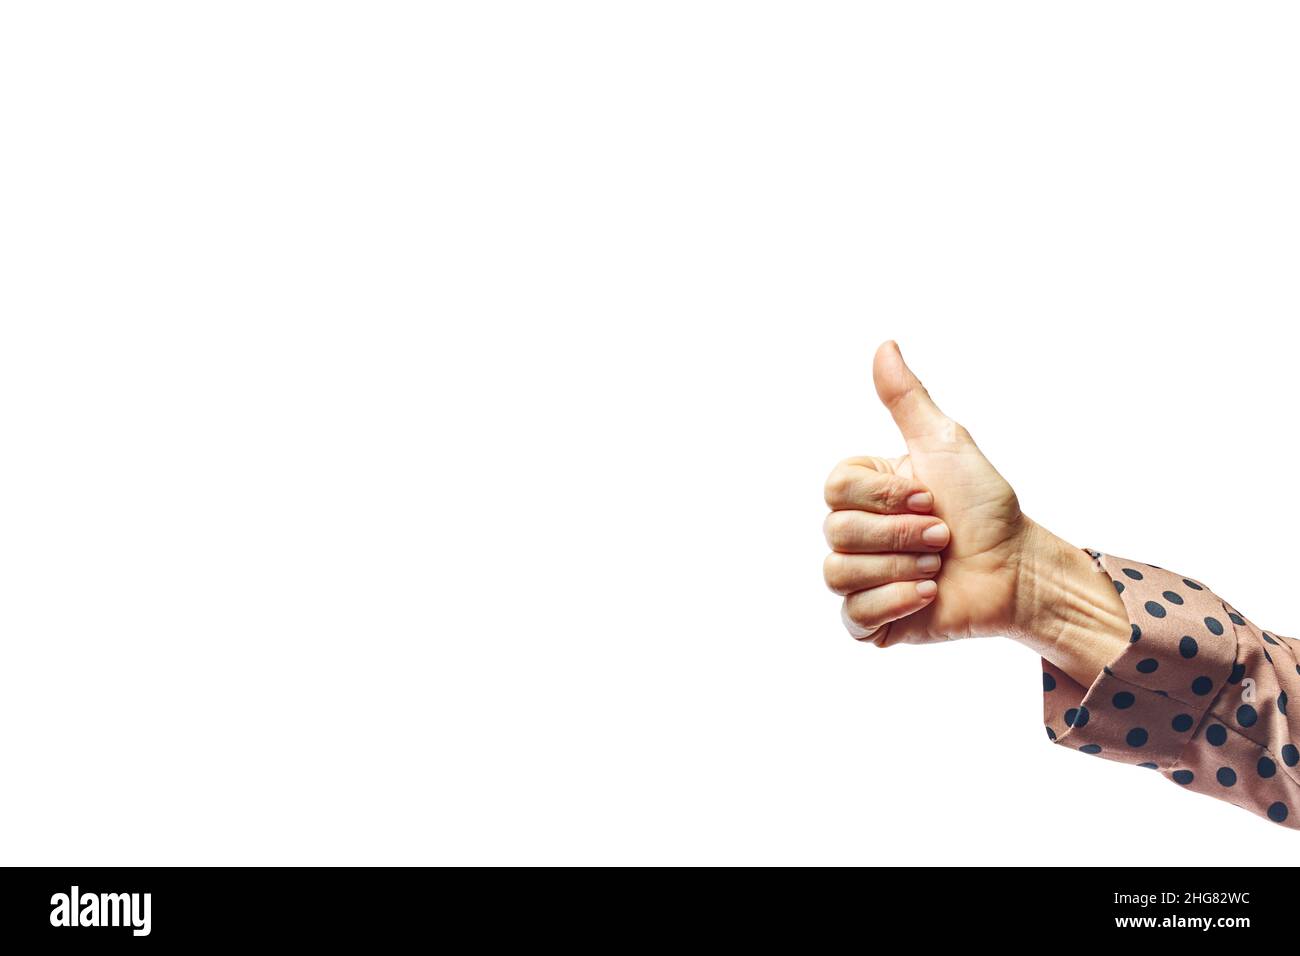 Hand showing thumb up sign against isolated on white background. Woman showing OK sign Stock Photo